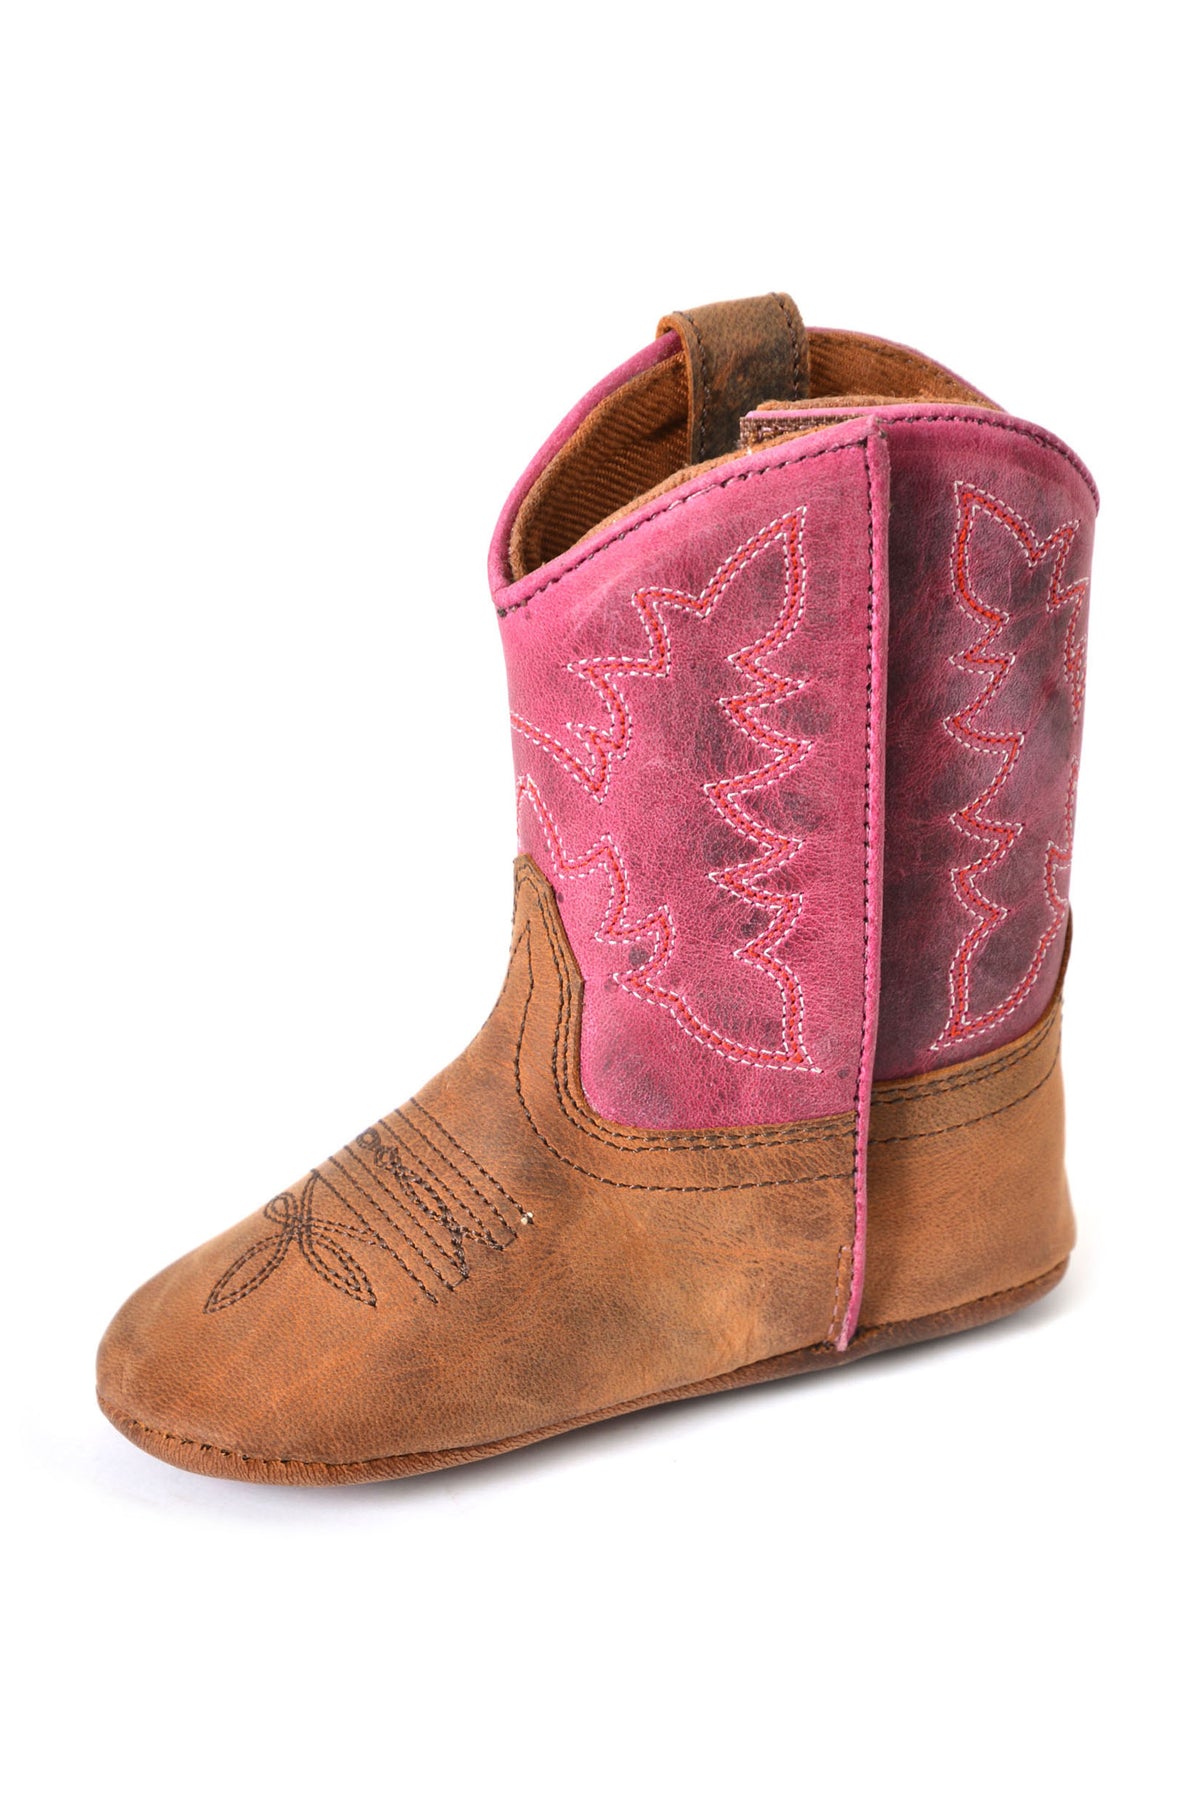 Pure Western Infant Molly Boot - Oiled Distressed